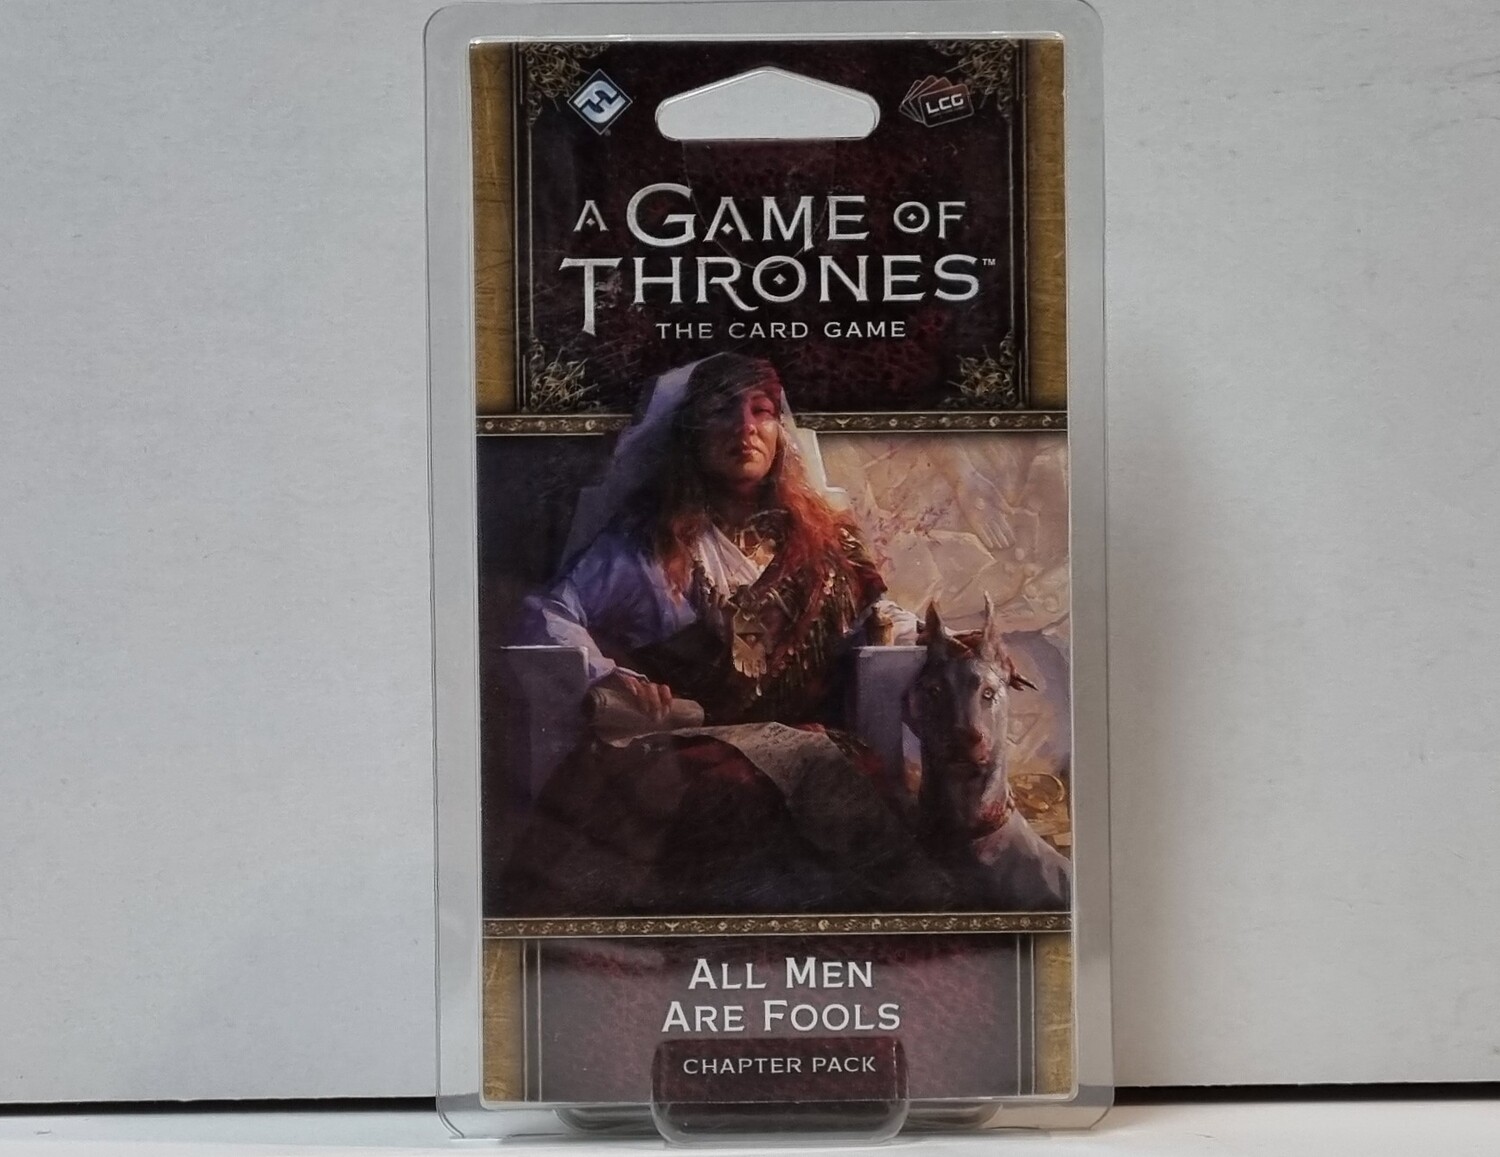 A Game of Thrones, Card Game , All Men Are Fools, Chapter Pack